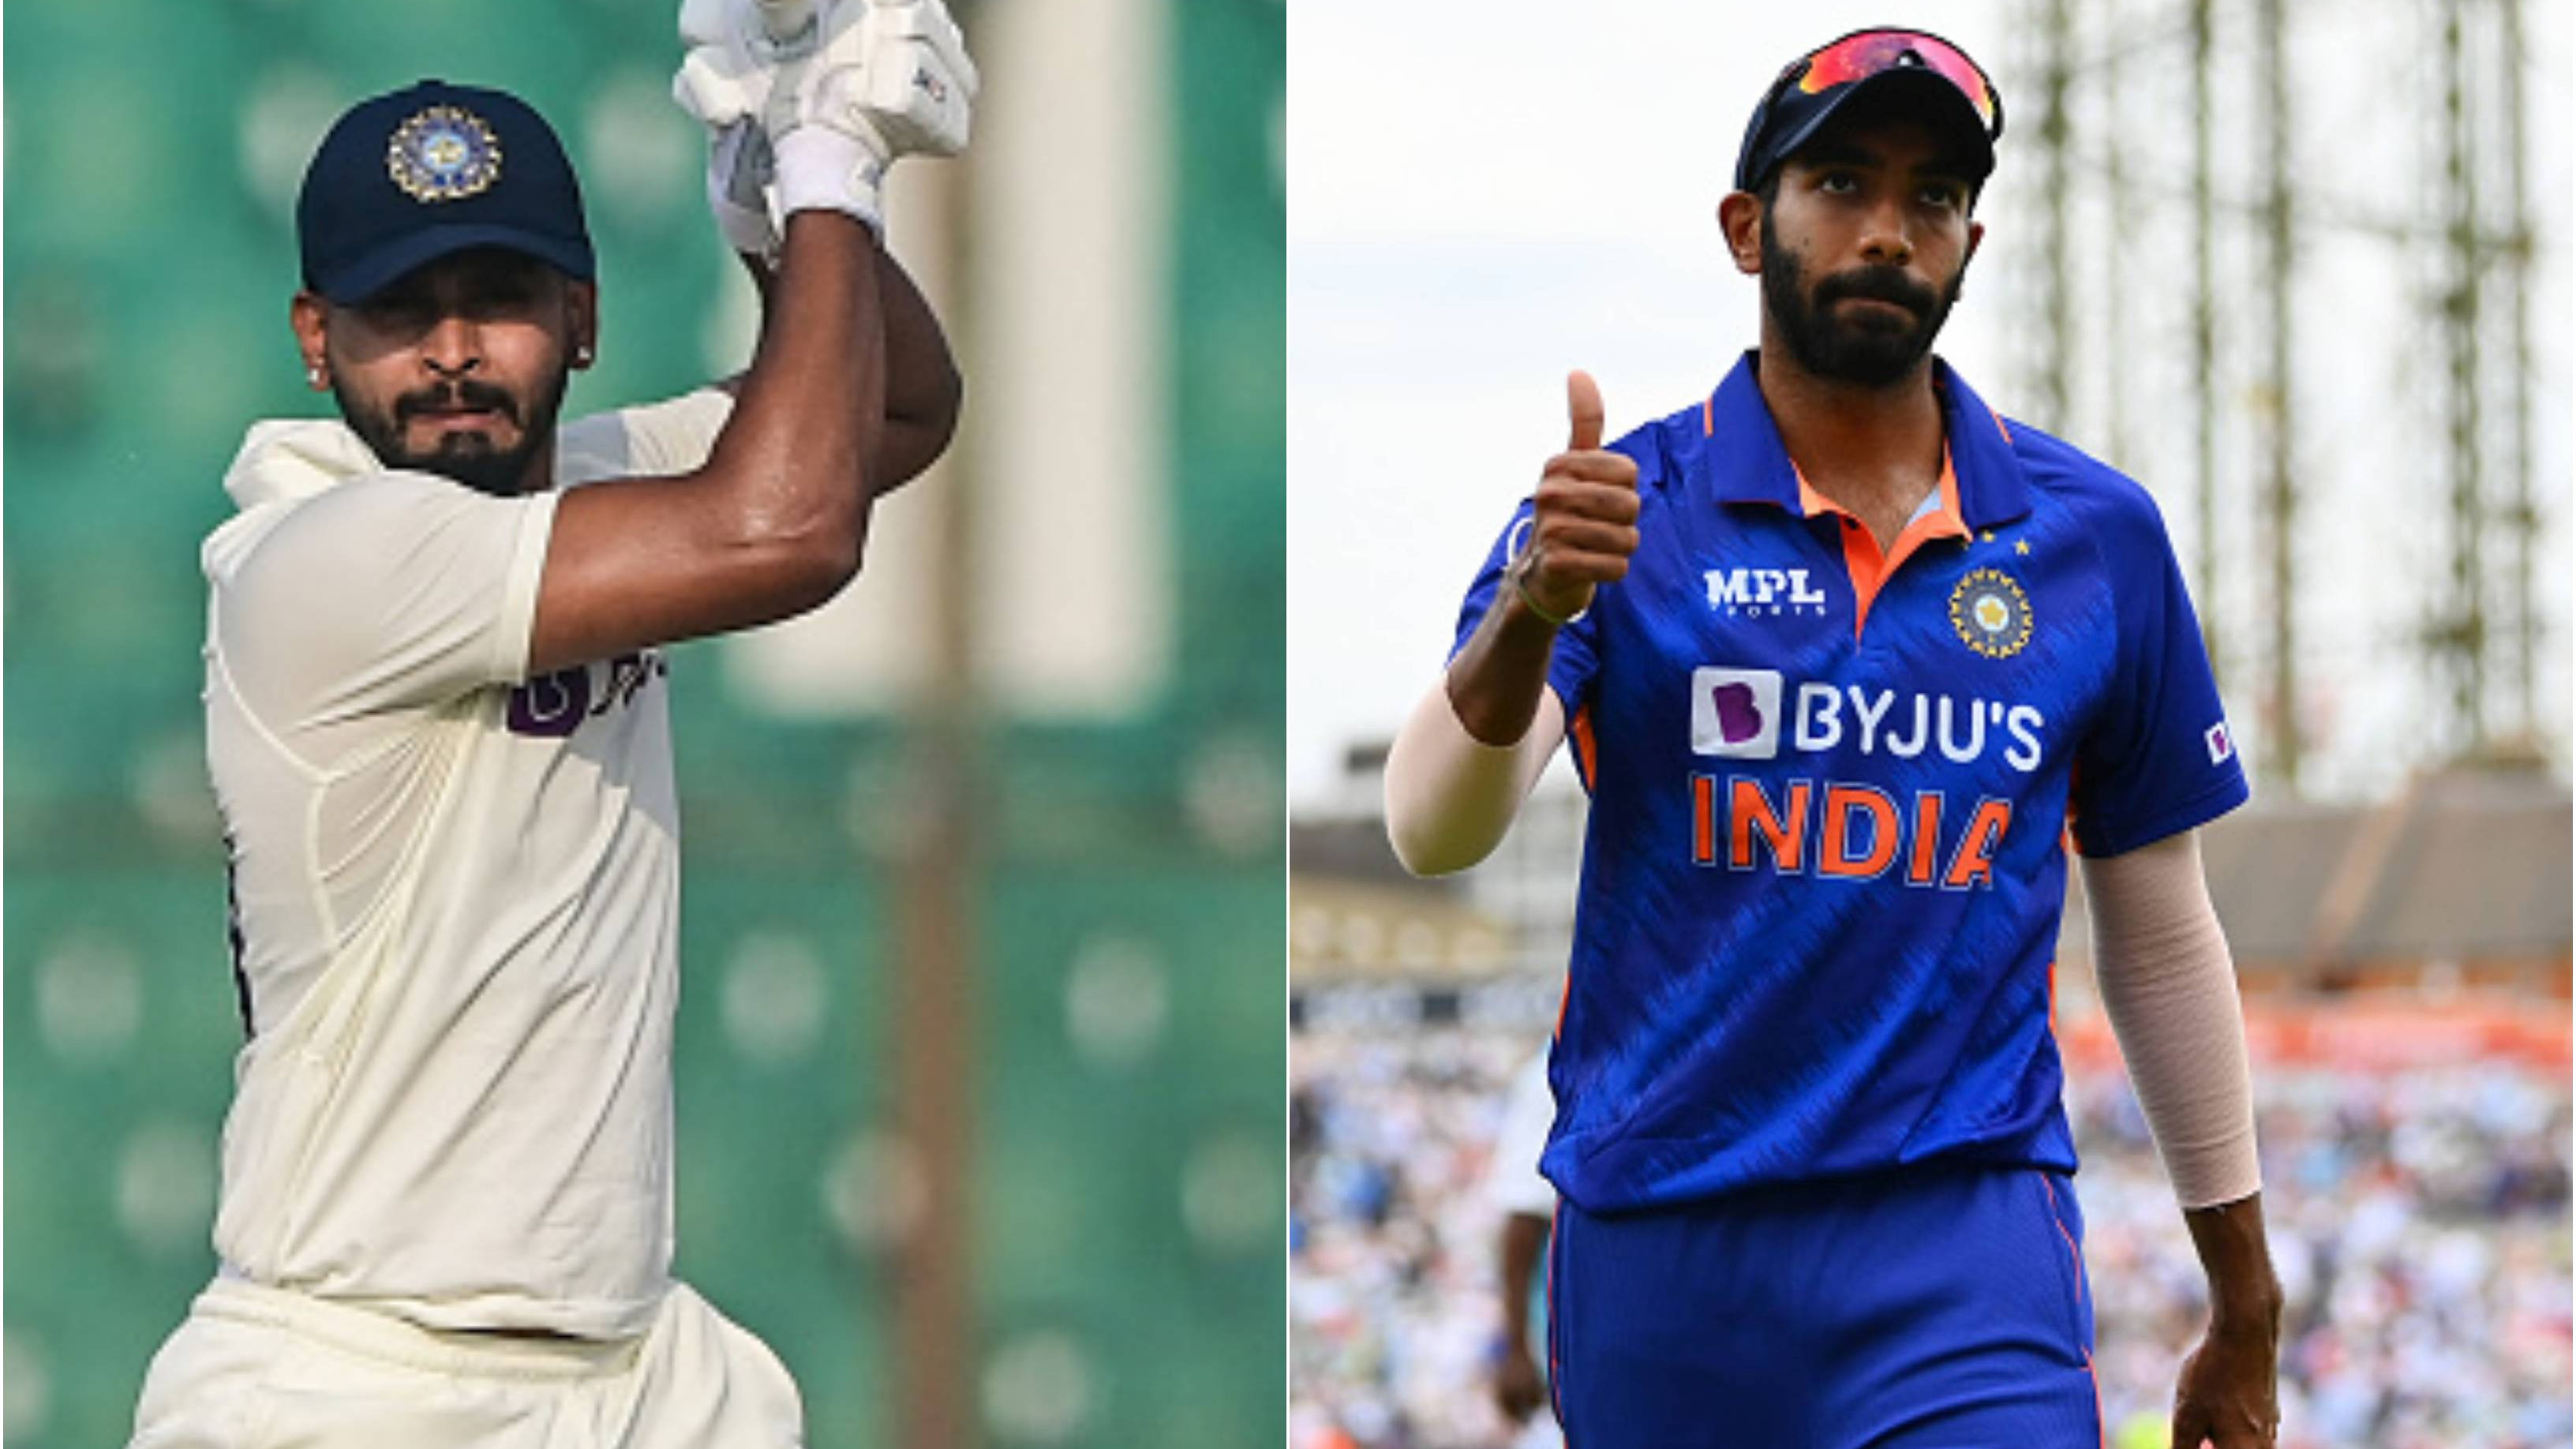 IND v AUS 2023: Shreyas Iyer remains doubtful for 2nd Test, Jasprit Bumrah likely to miss ODI series against Australia